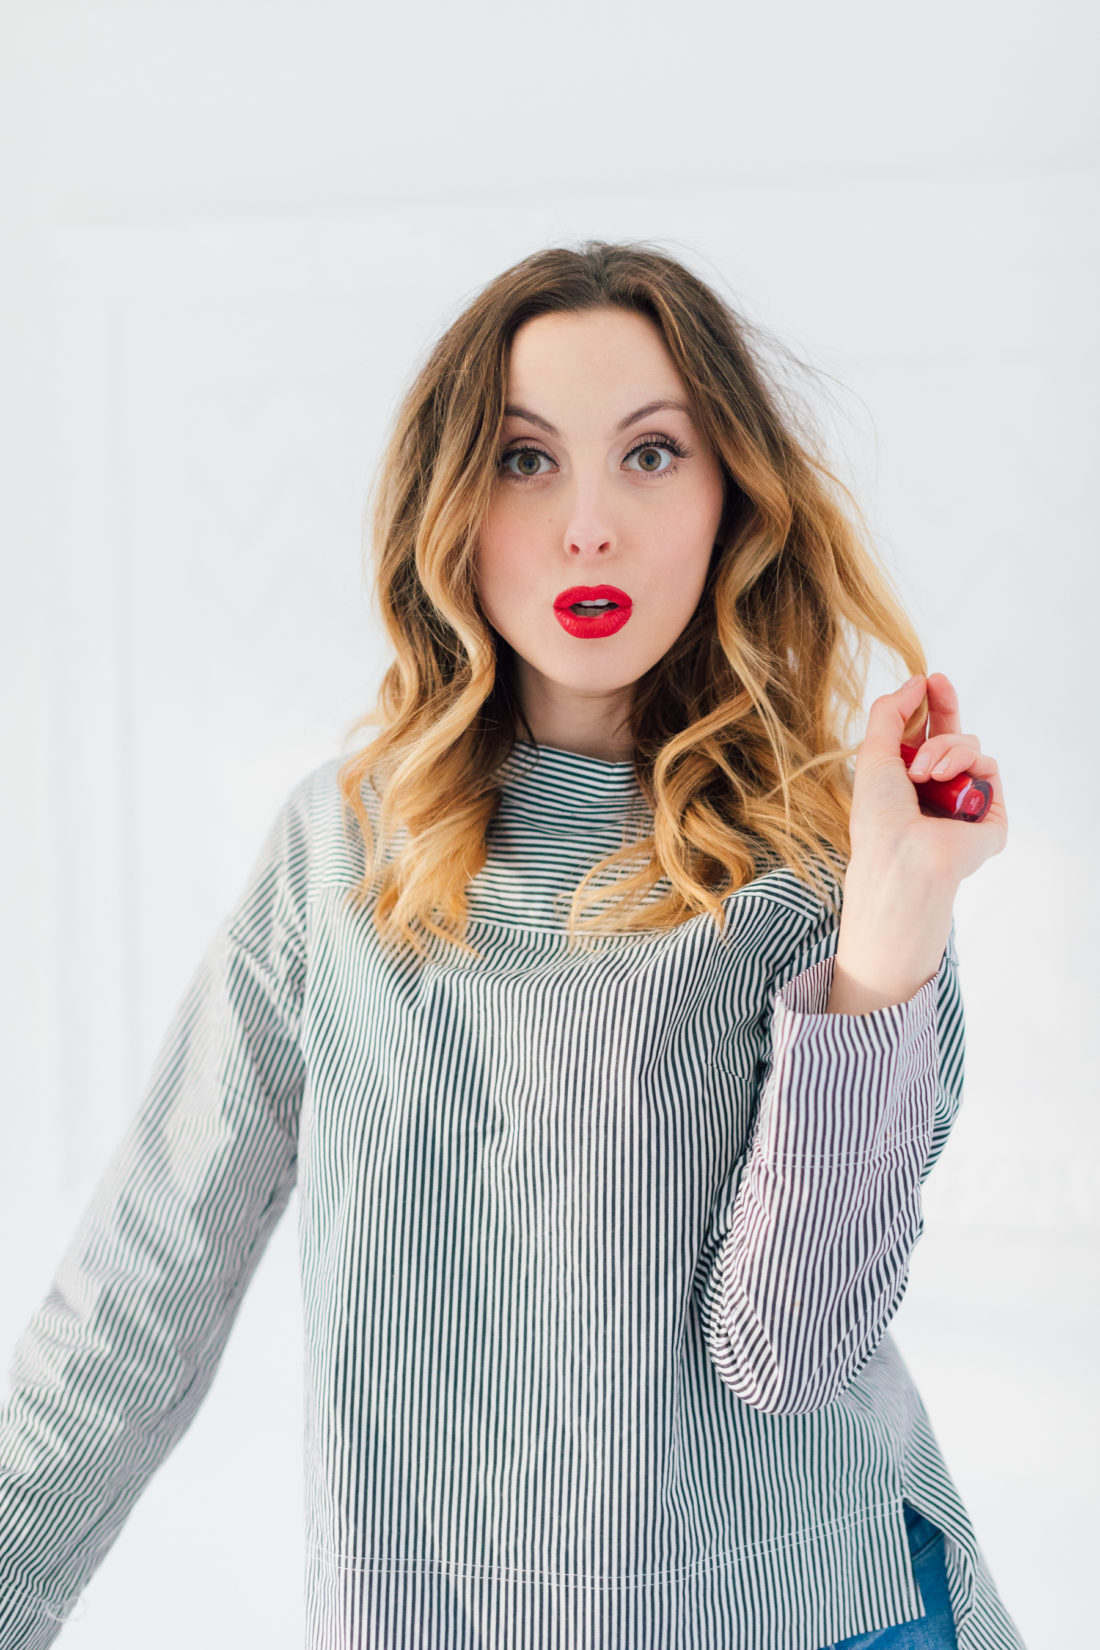 Eva Amurri Martino wears a striped boatneck top, and the perfect holiday red shade of lipstick